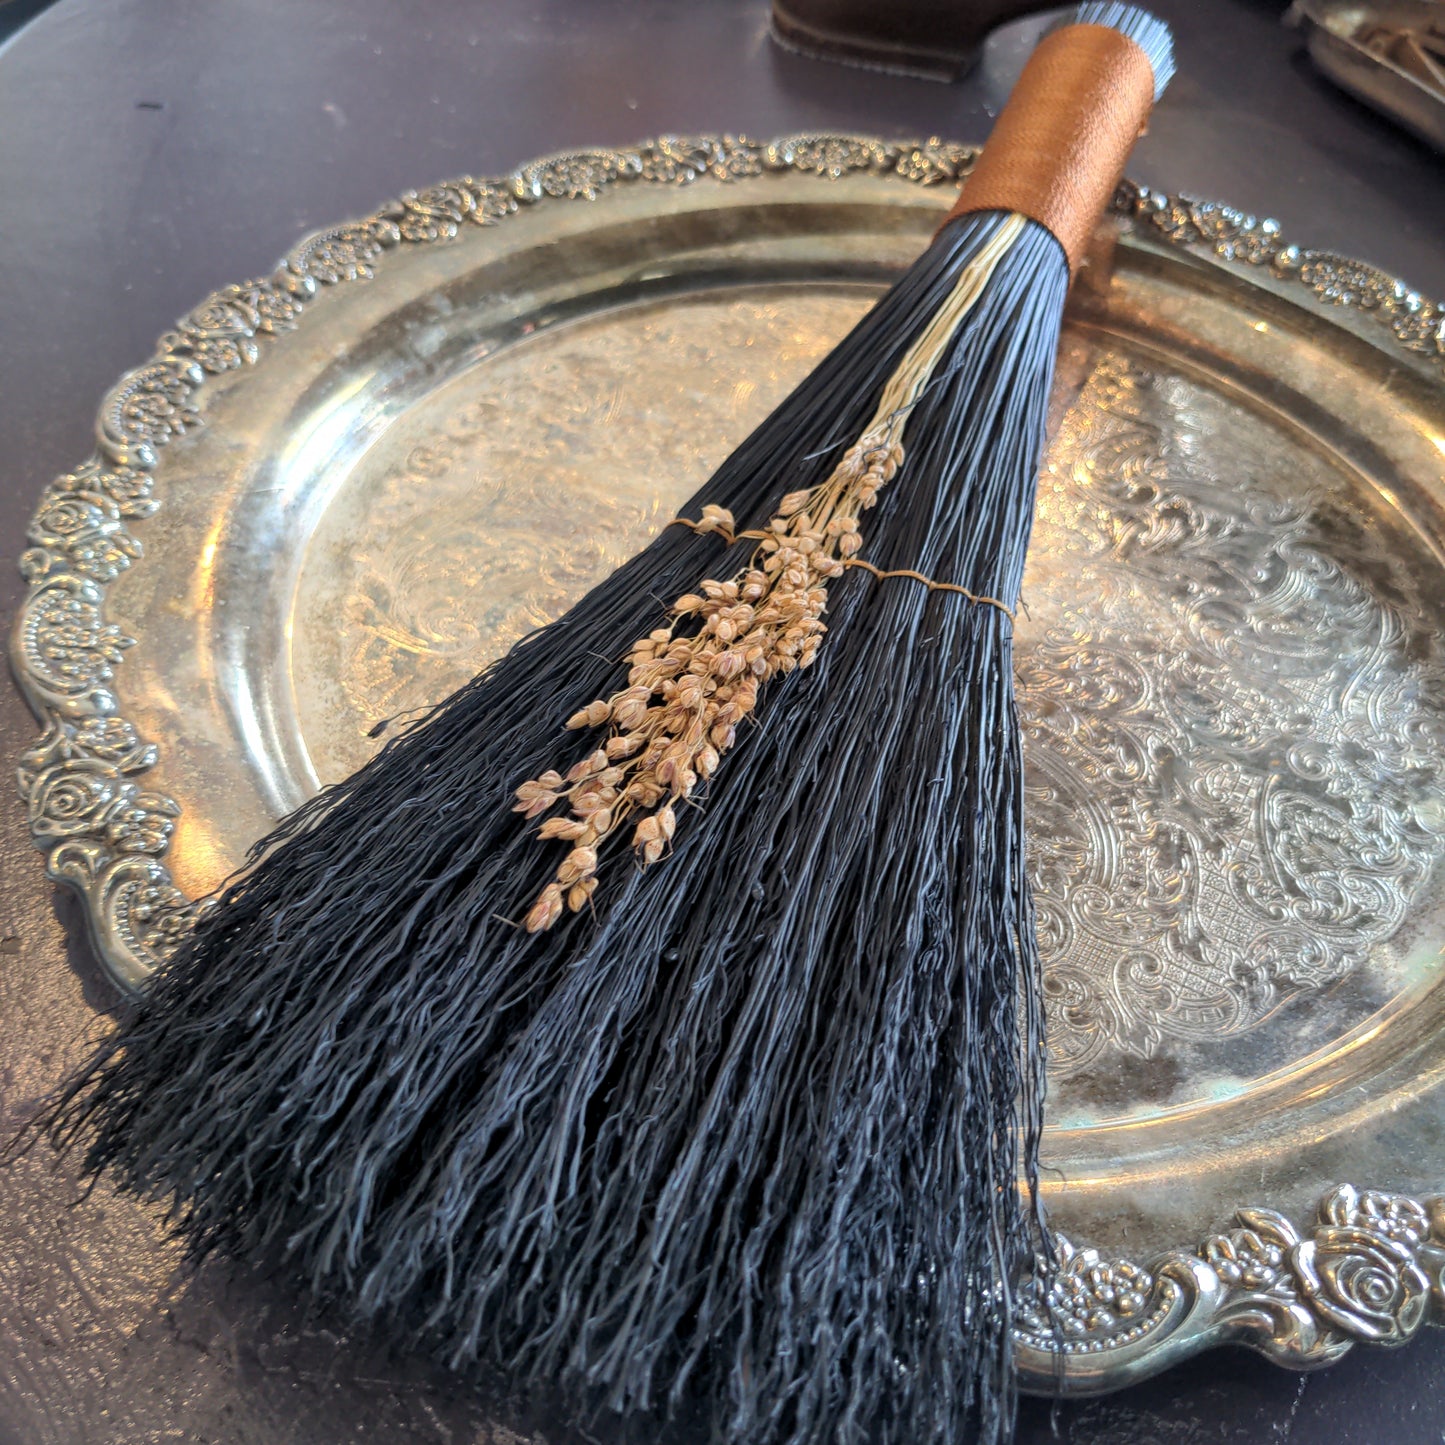 Stitched Whisk Black and Copper Broom